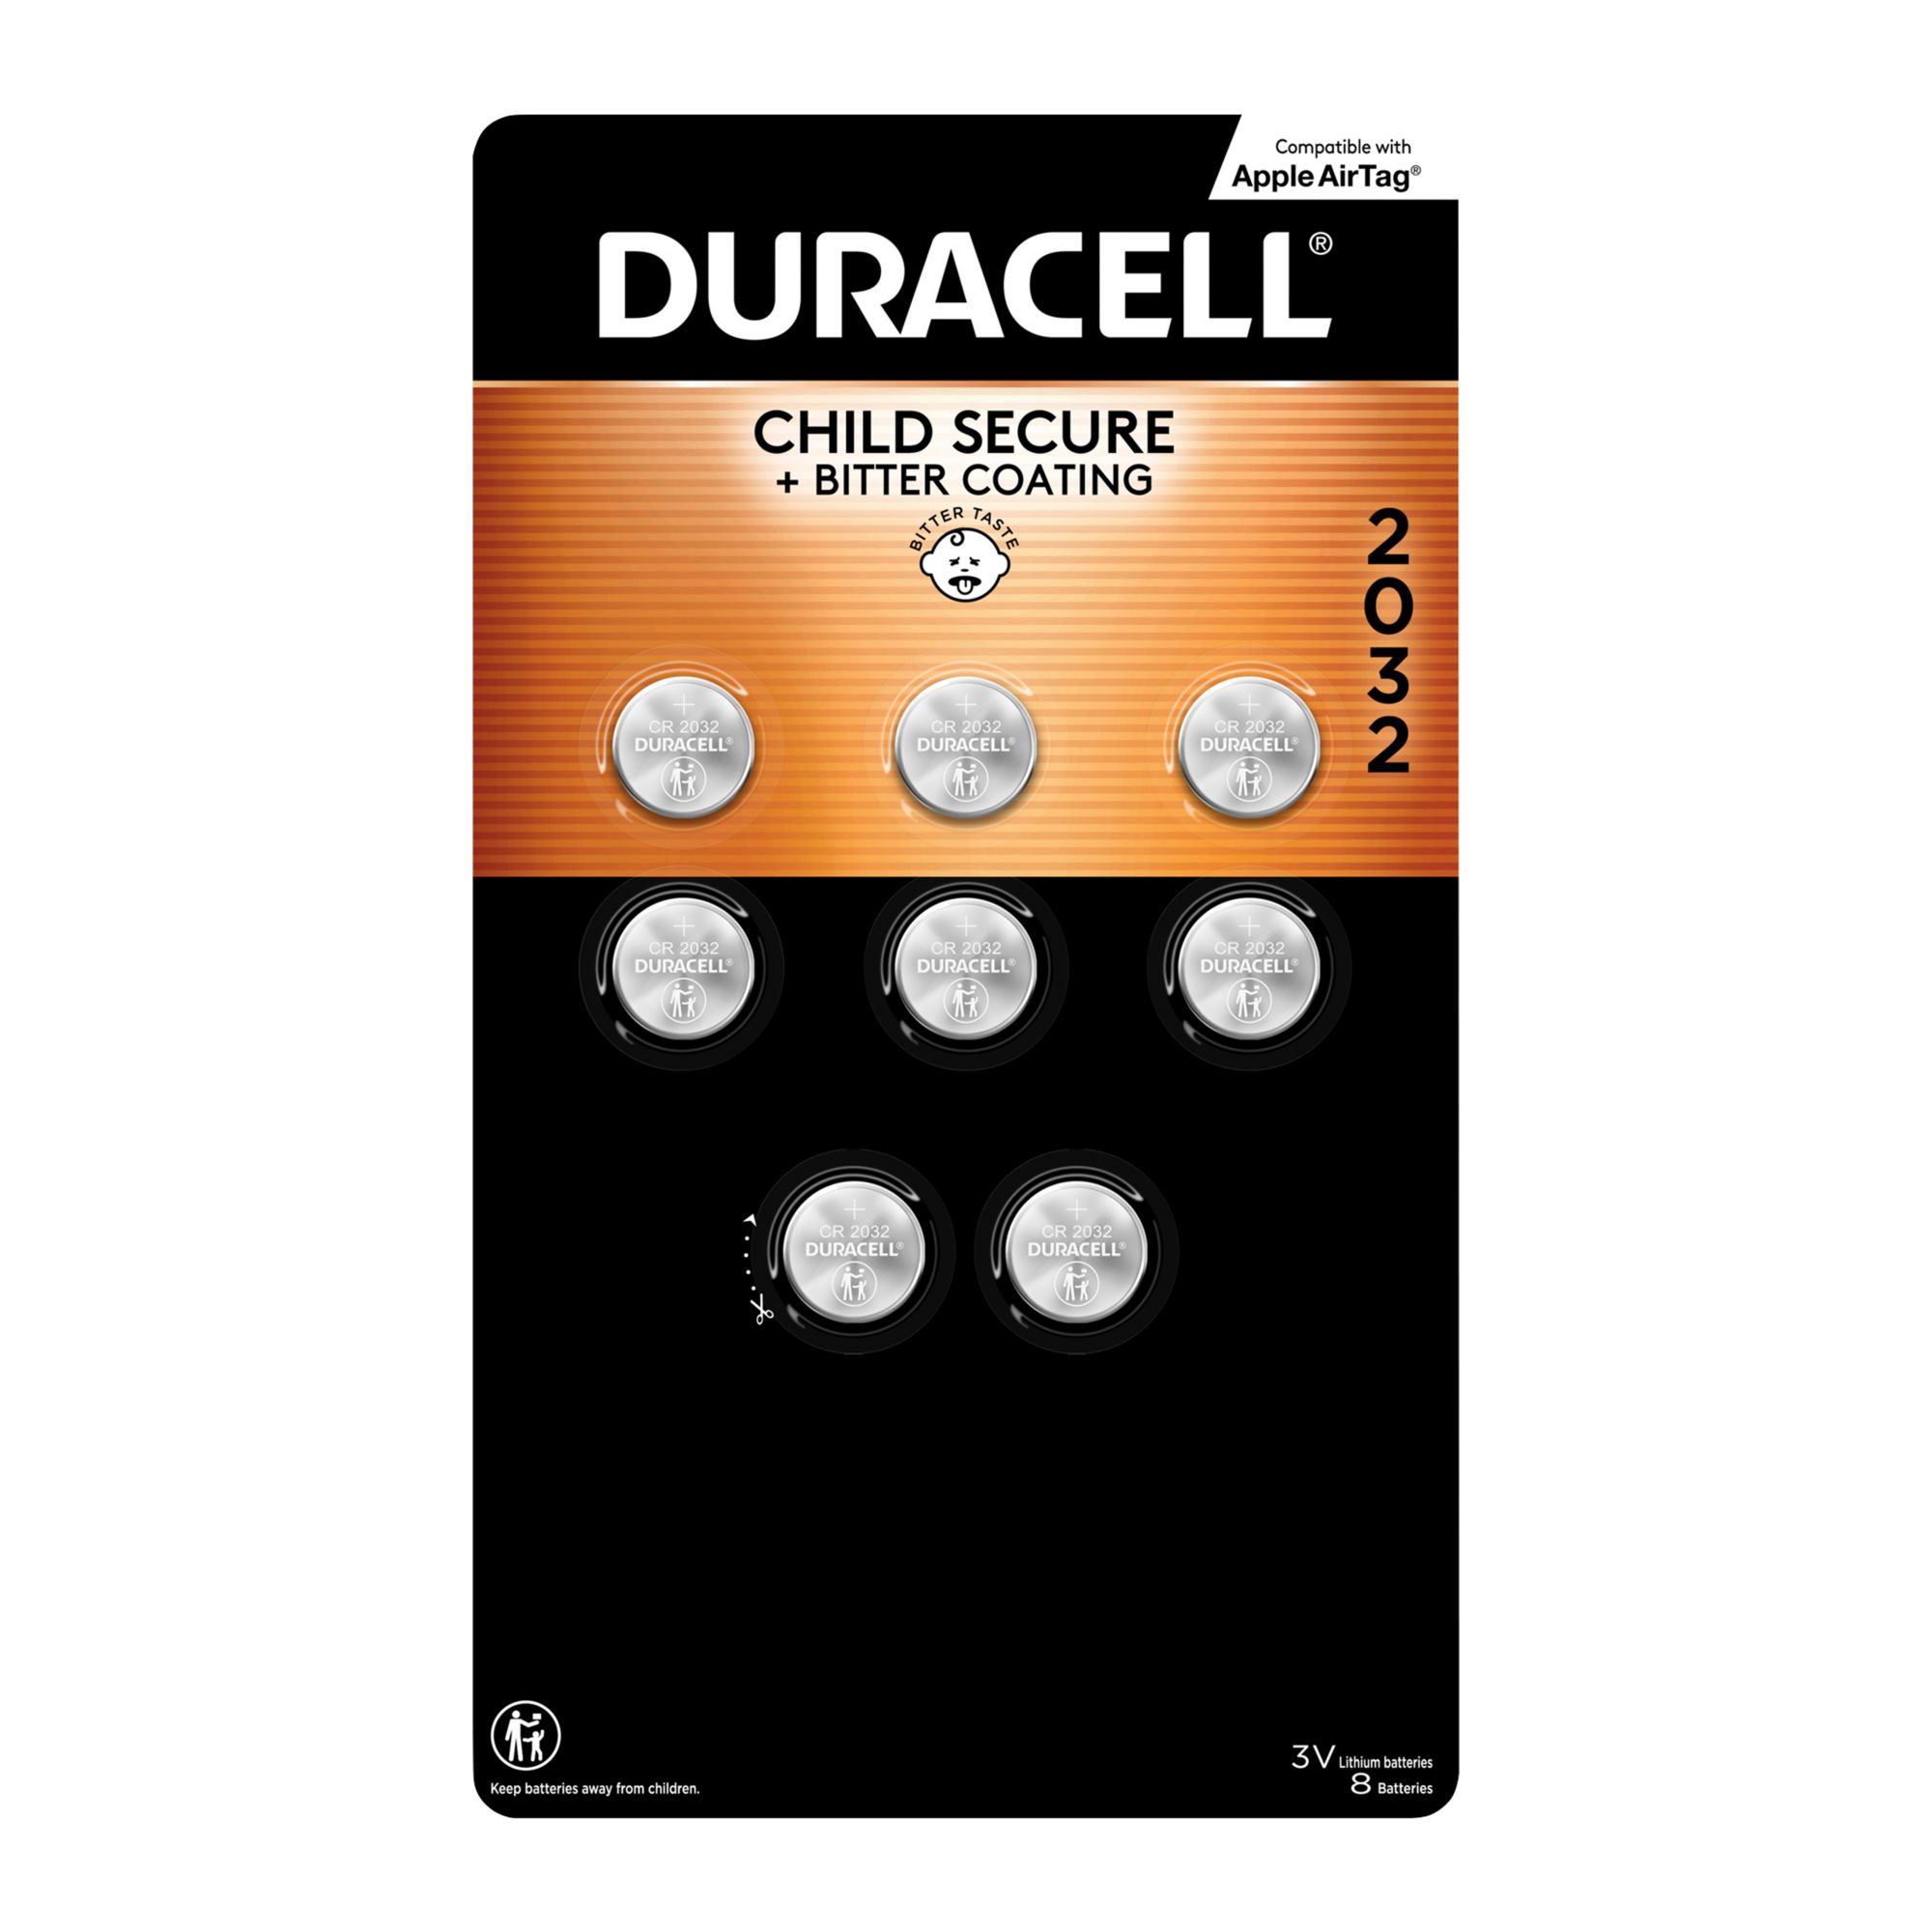 Get Duracell CR2032 Batteries For FREE At Publix - iHeartPublix